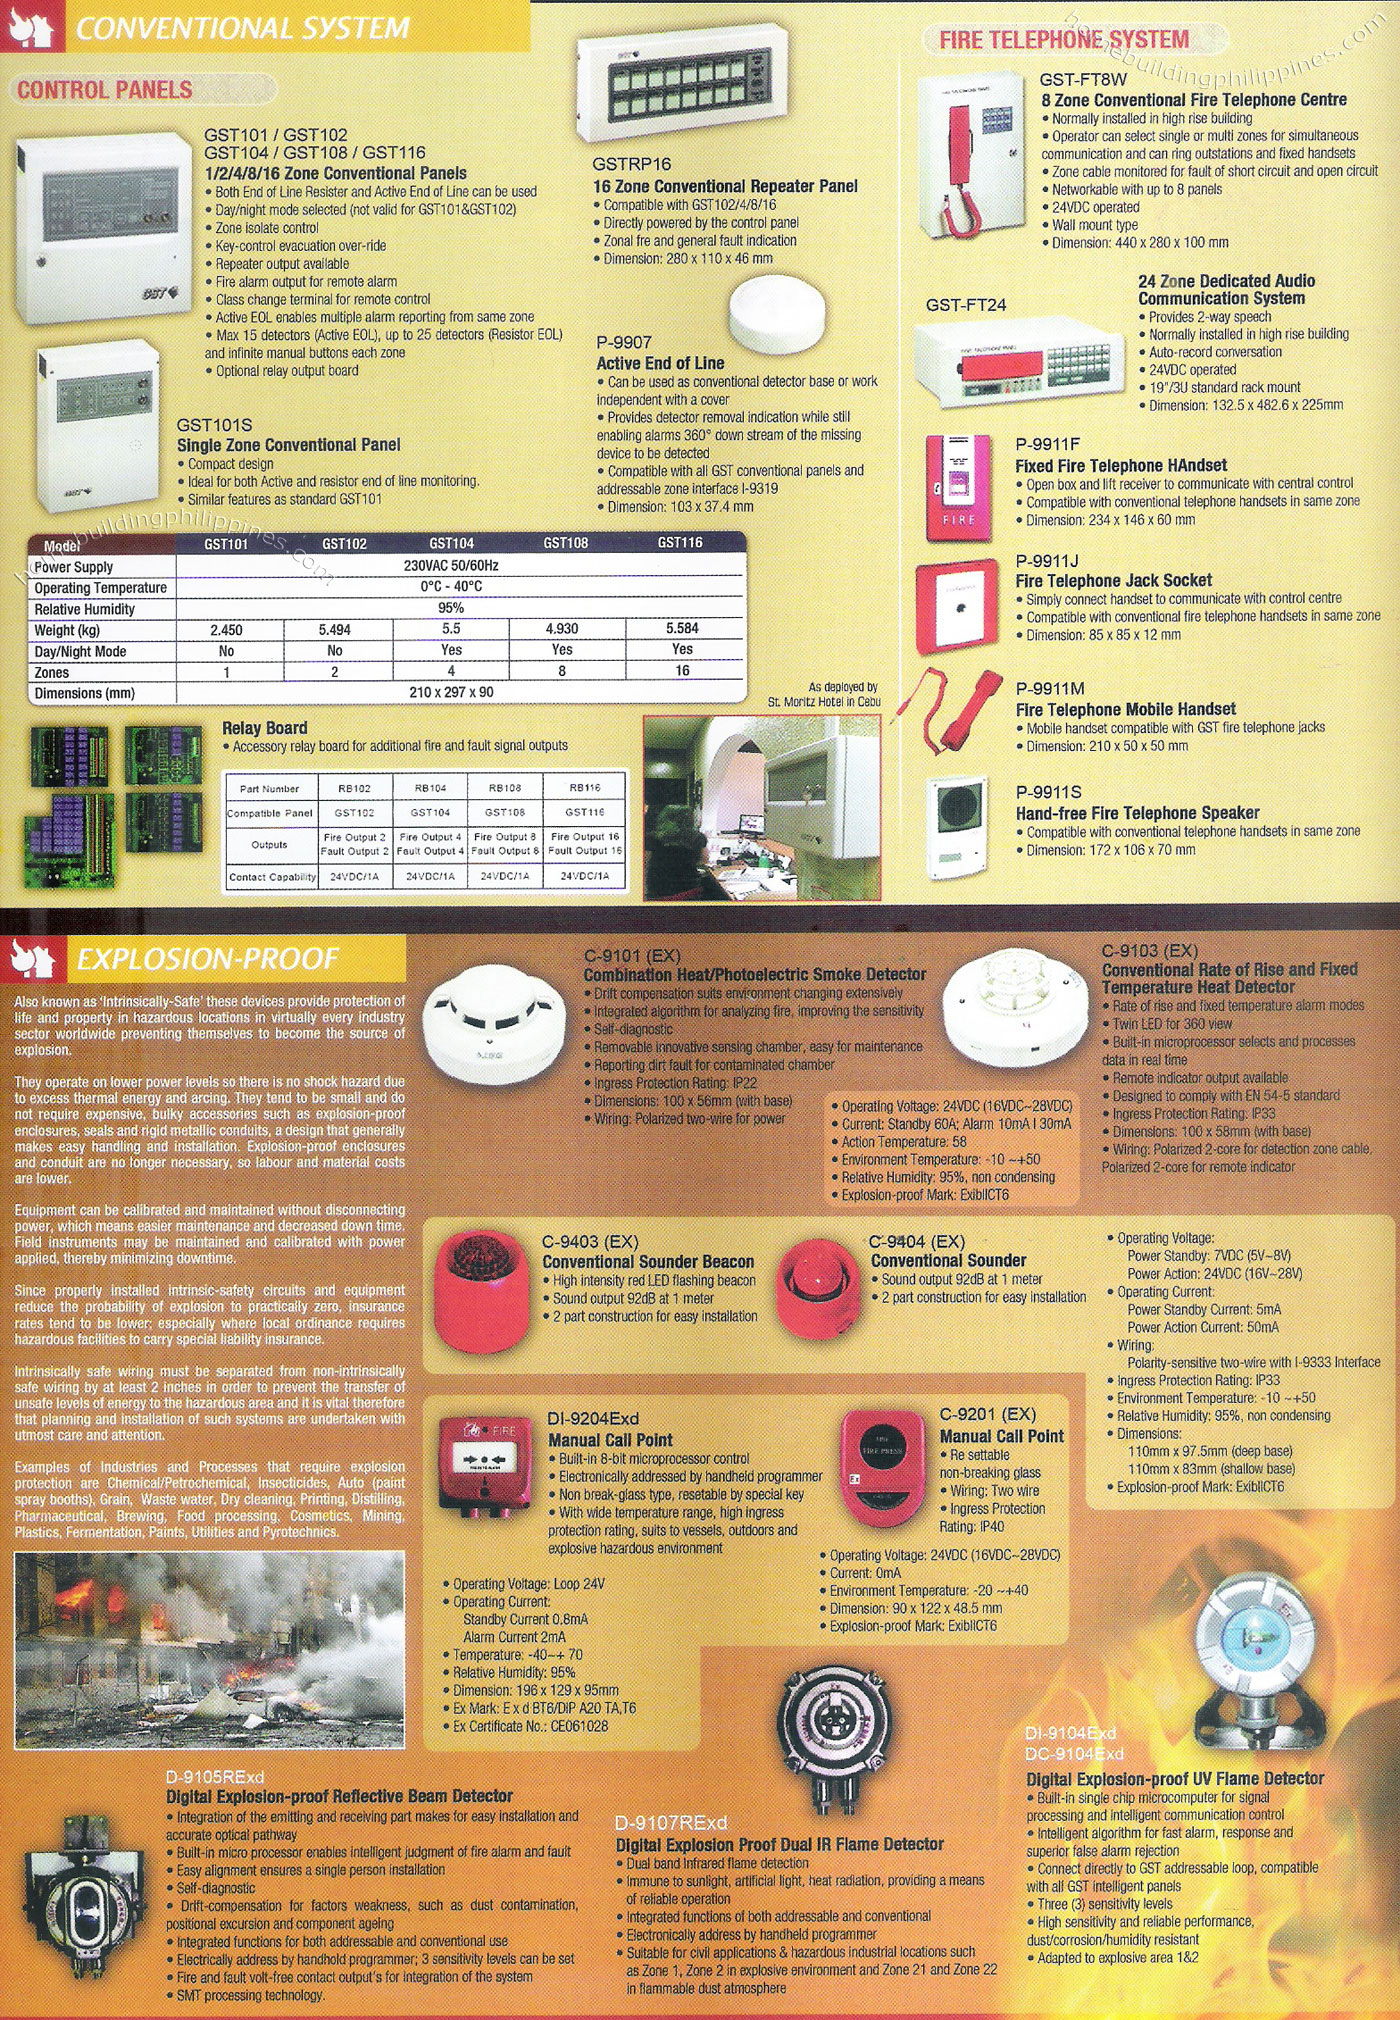 Conventional Fire Detection Control Panel; Telephone System; Heat, Smoke, Flame Detector Sounder/Beacon